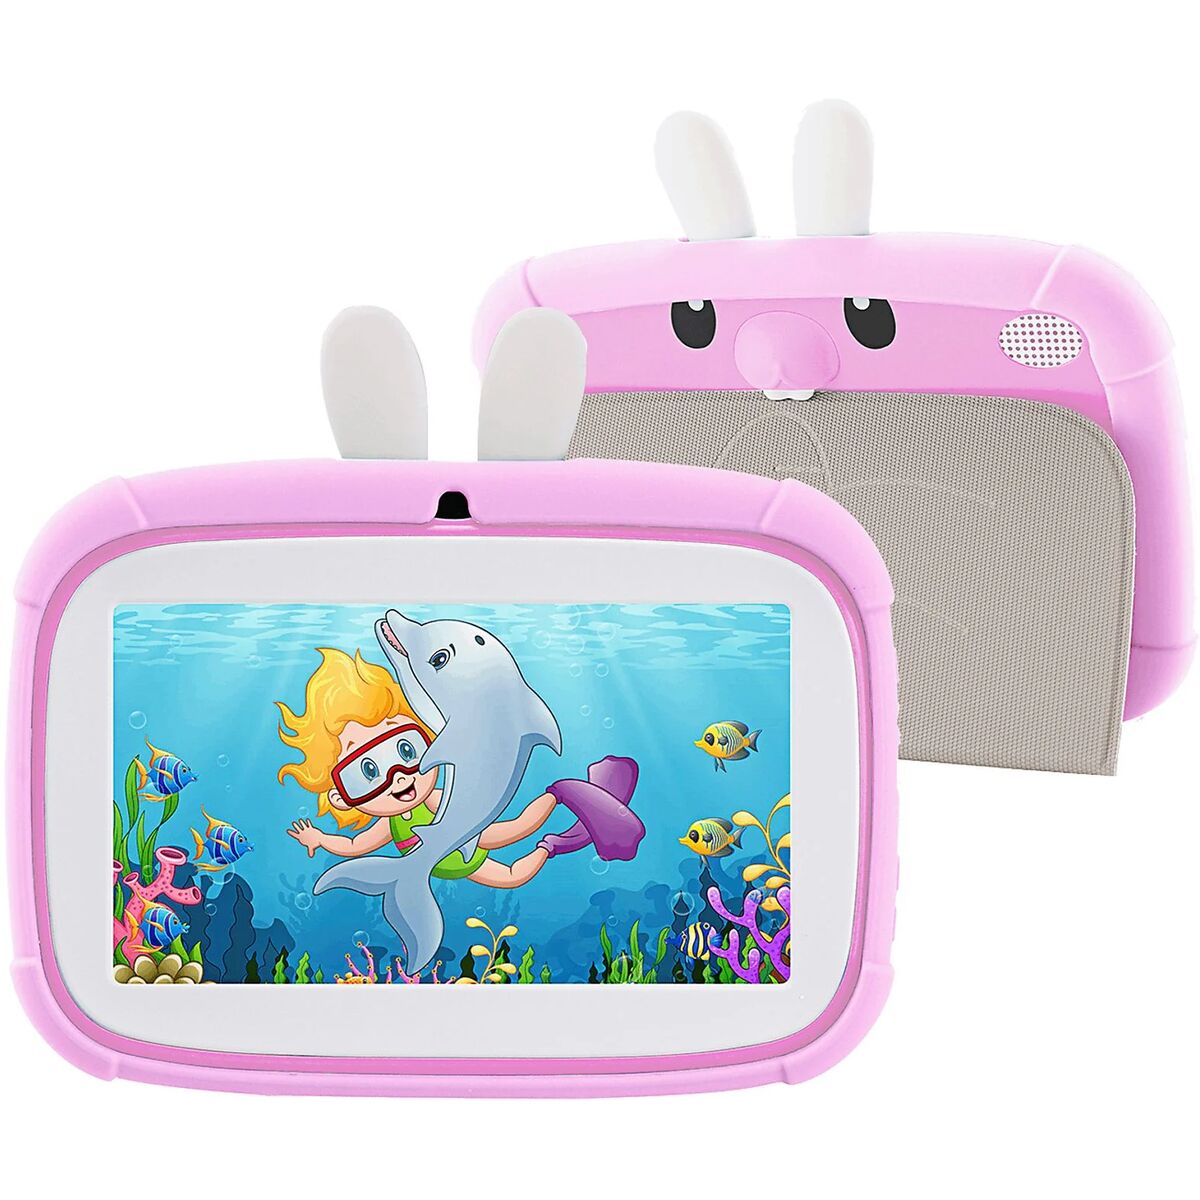 Interactive Tablet for Children A133 Pink 32 GB 2 GB RAM 7"